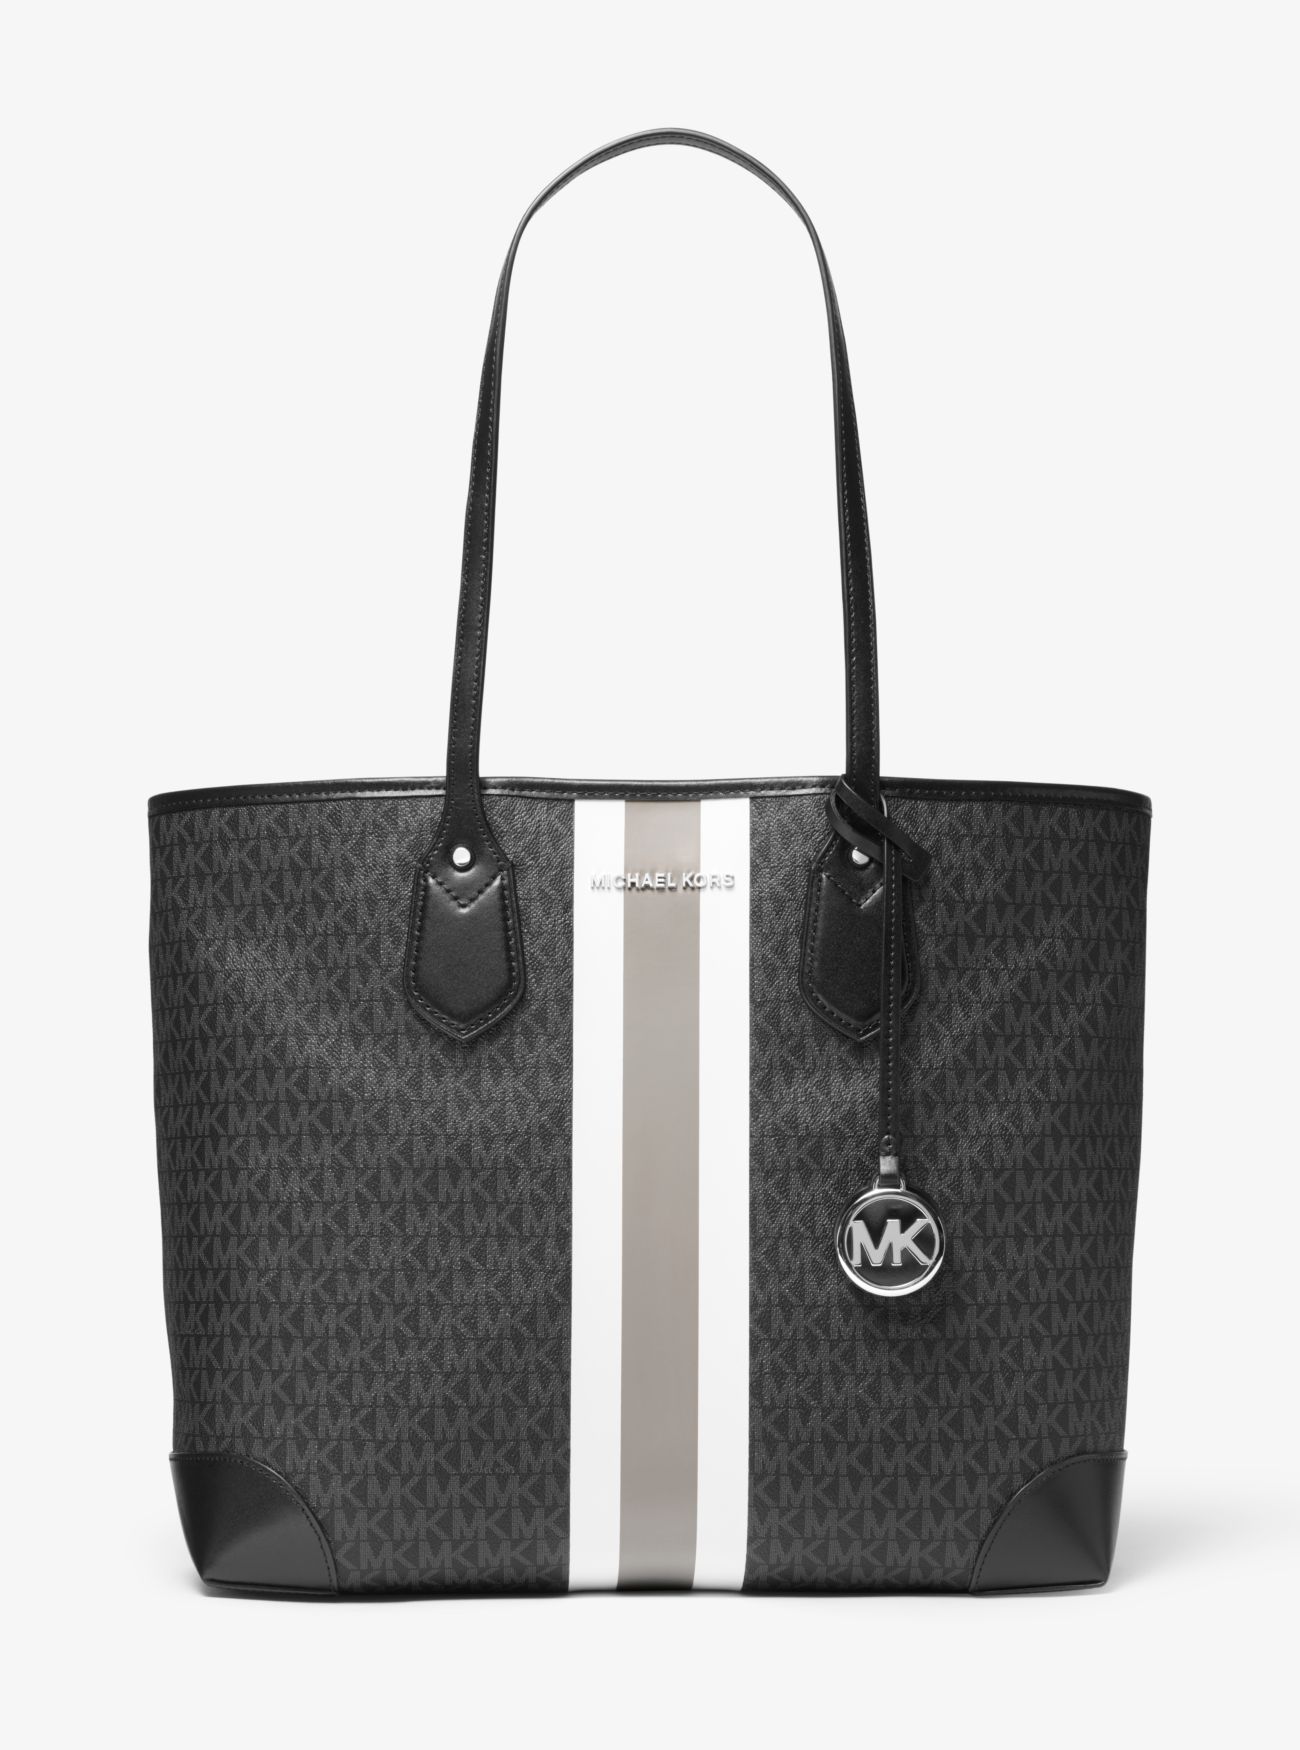 Louis Vuitton Neverfull Black & White - clothing & accessories - by owner -  apparel sale - craigslist